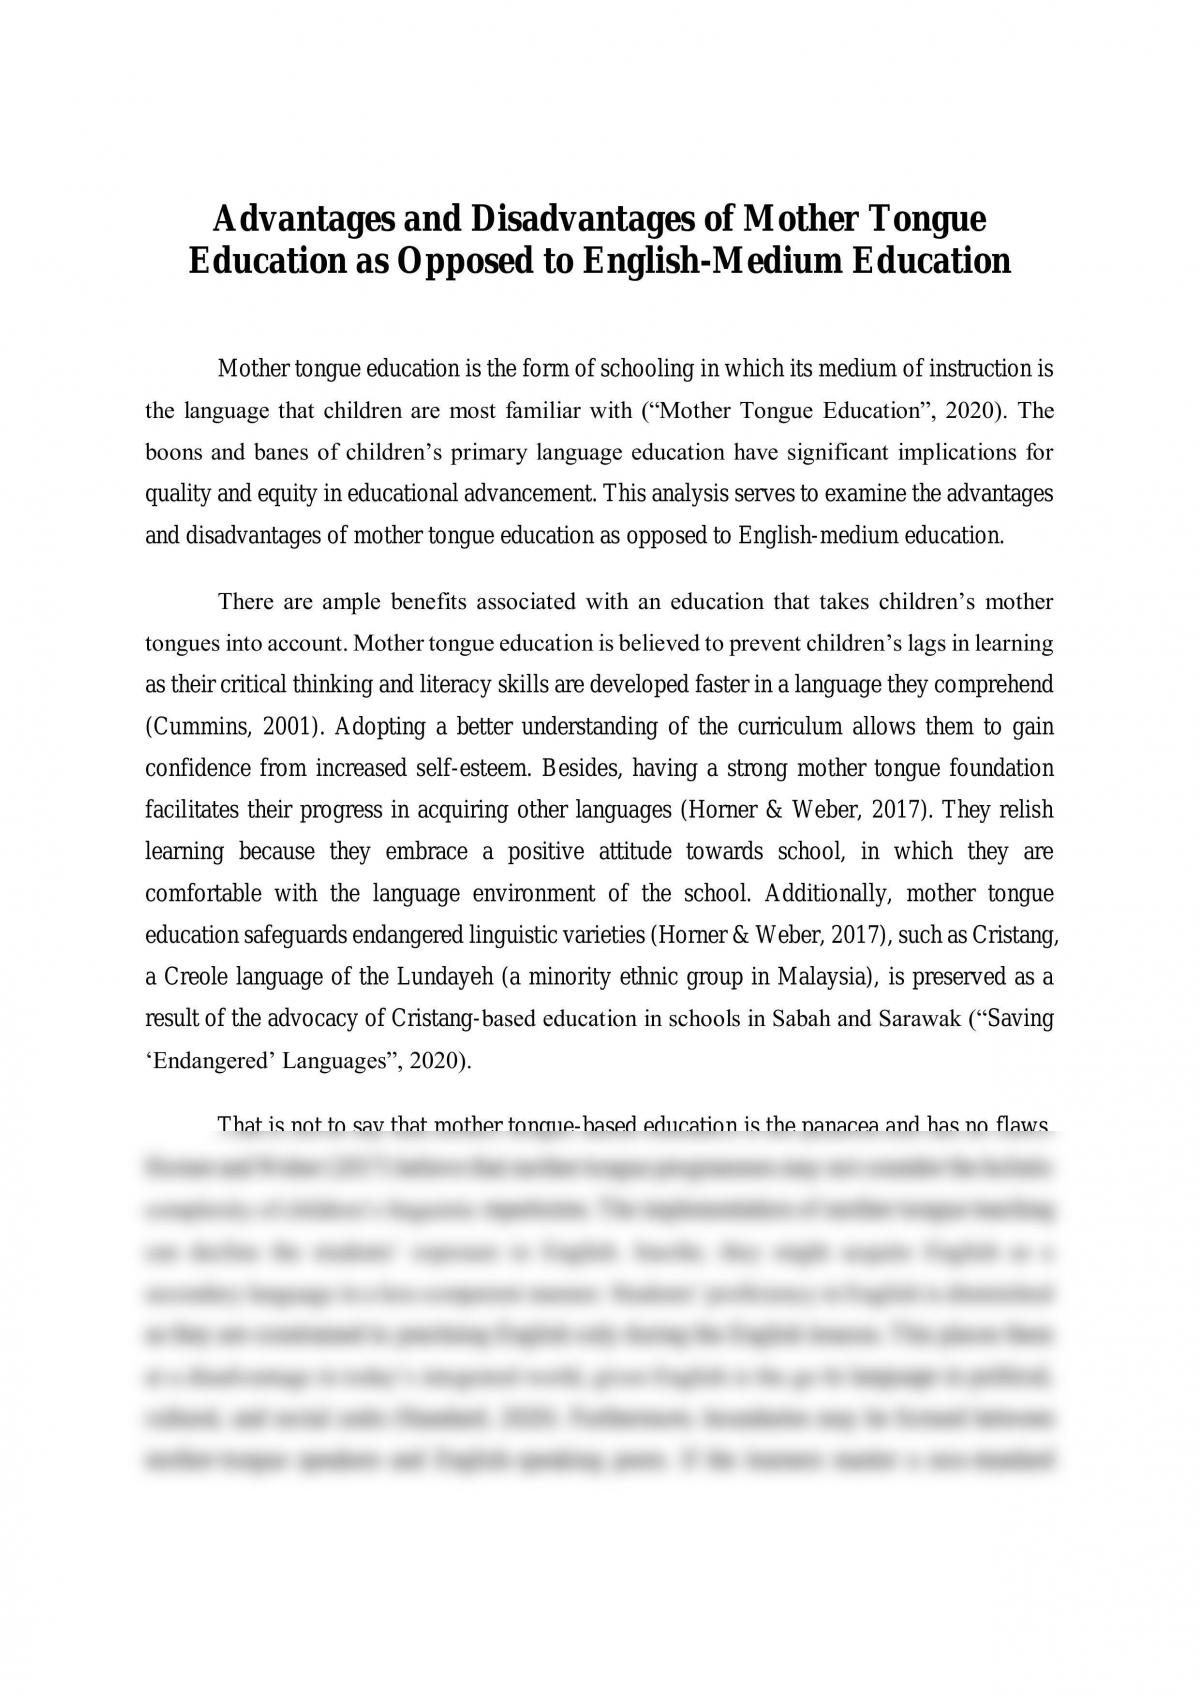 Advantages and Disadvantages of Mother Tongue Education - Page 1